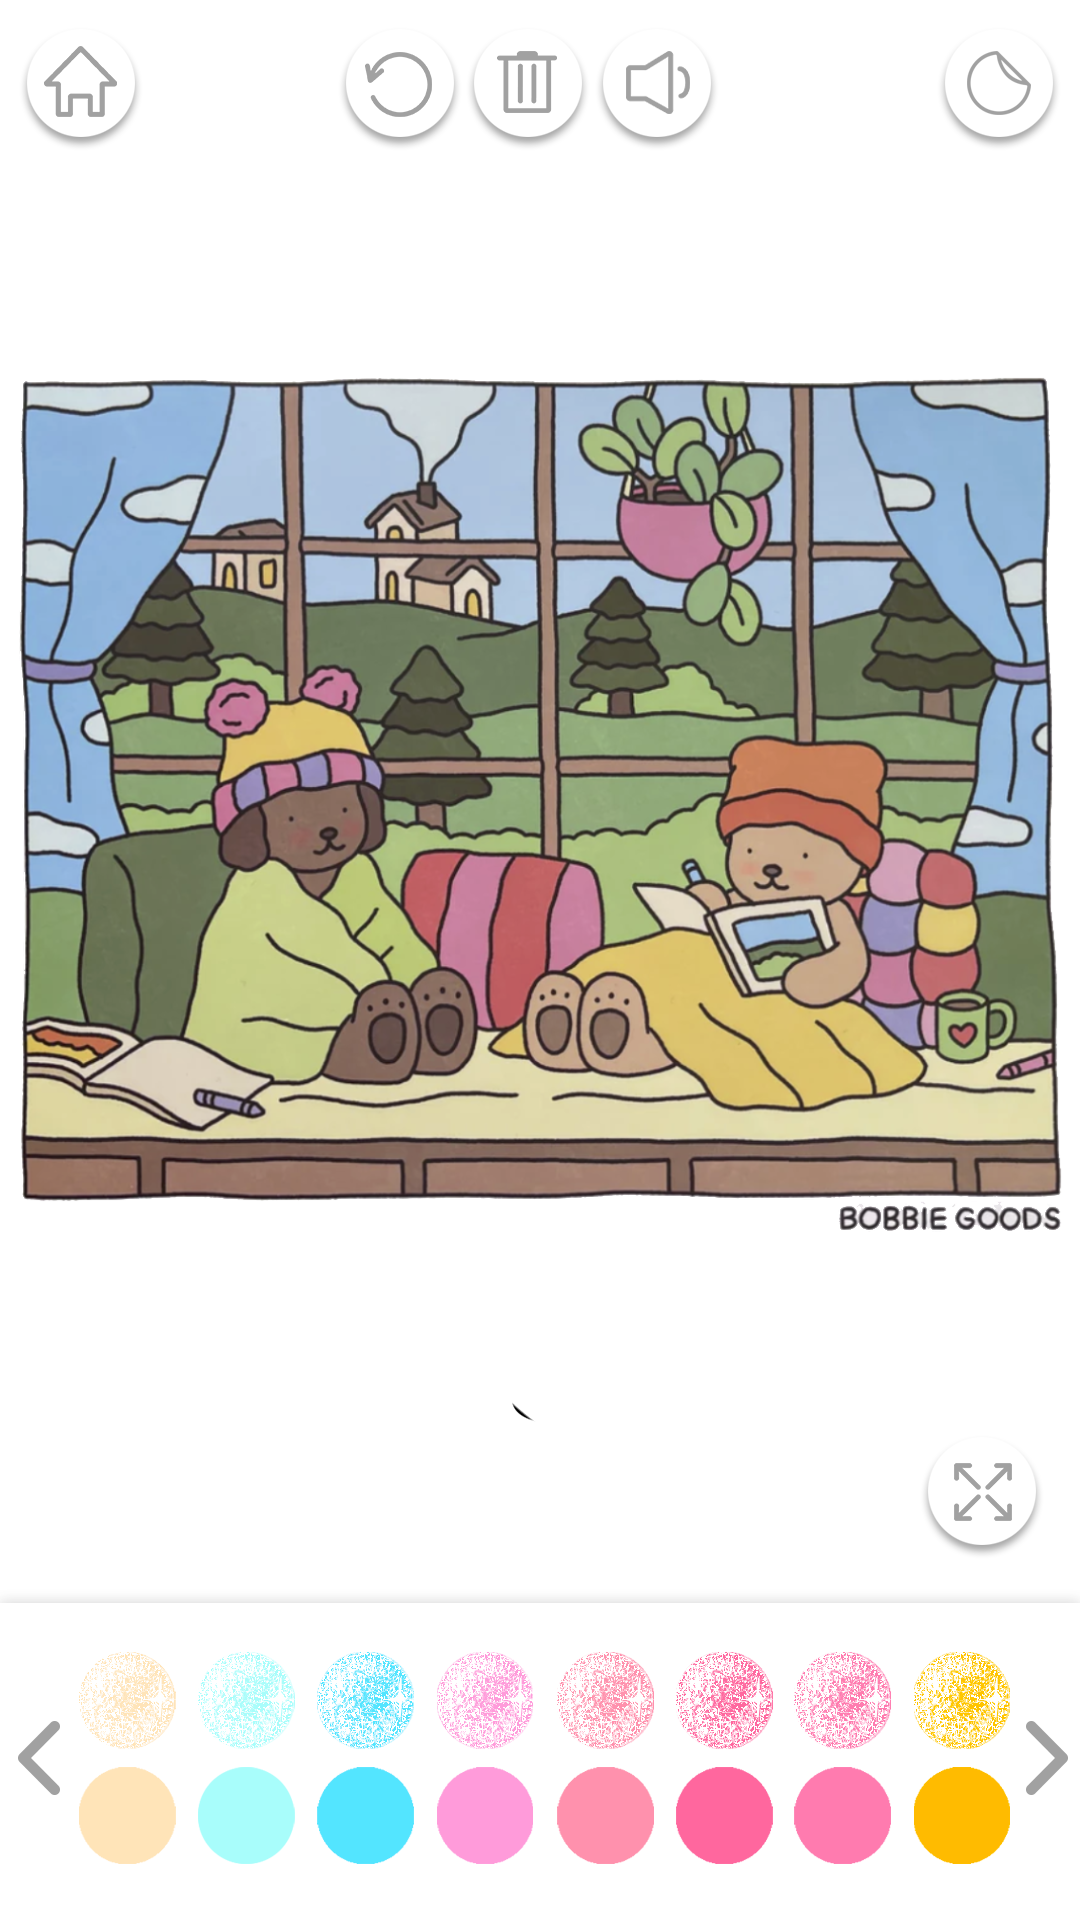 Bobbie Goods Coloring Pages  Coloring books, Detailed coloring pages, Coloring  book art